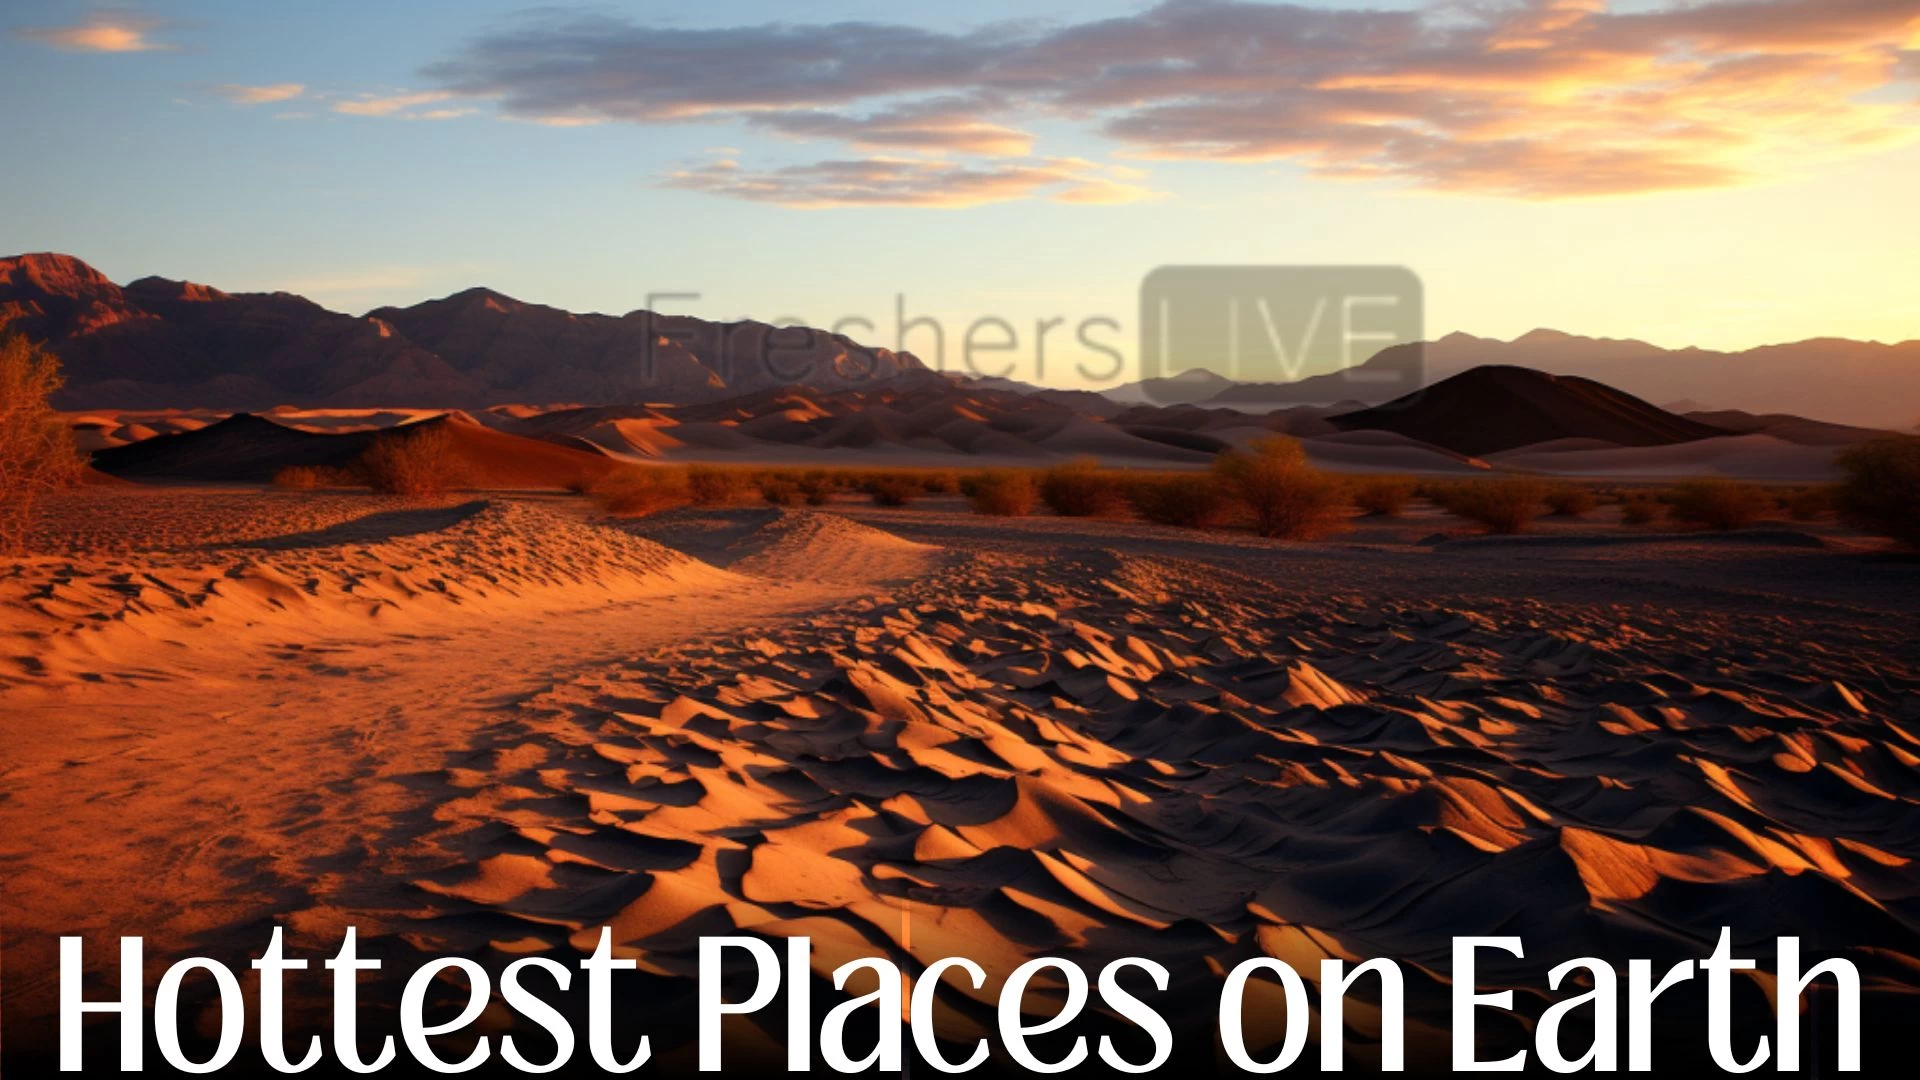 Top 10 Hottest Places on Earth - Where the World's Heat Soars